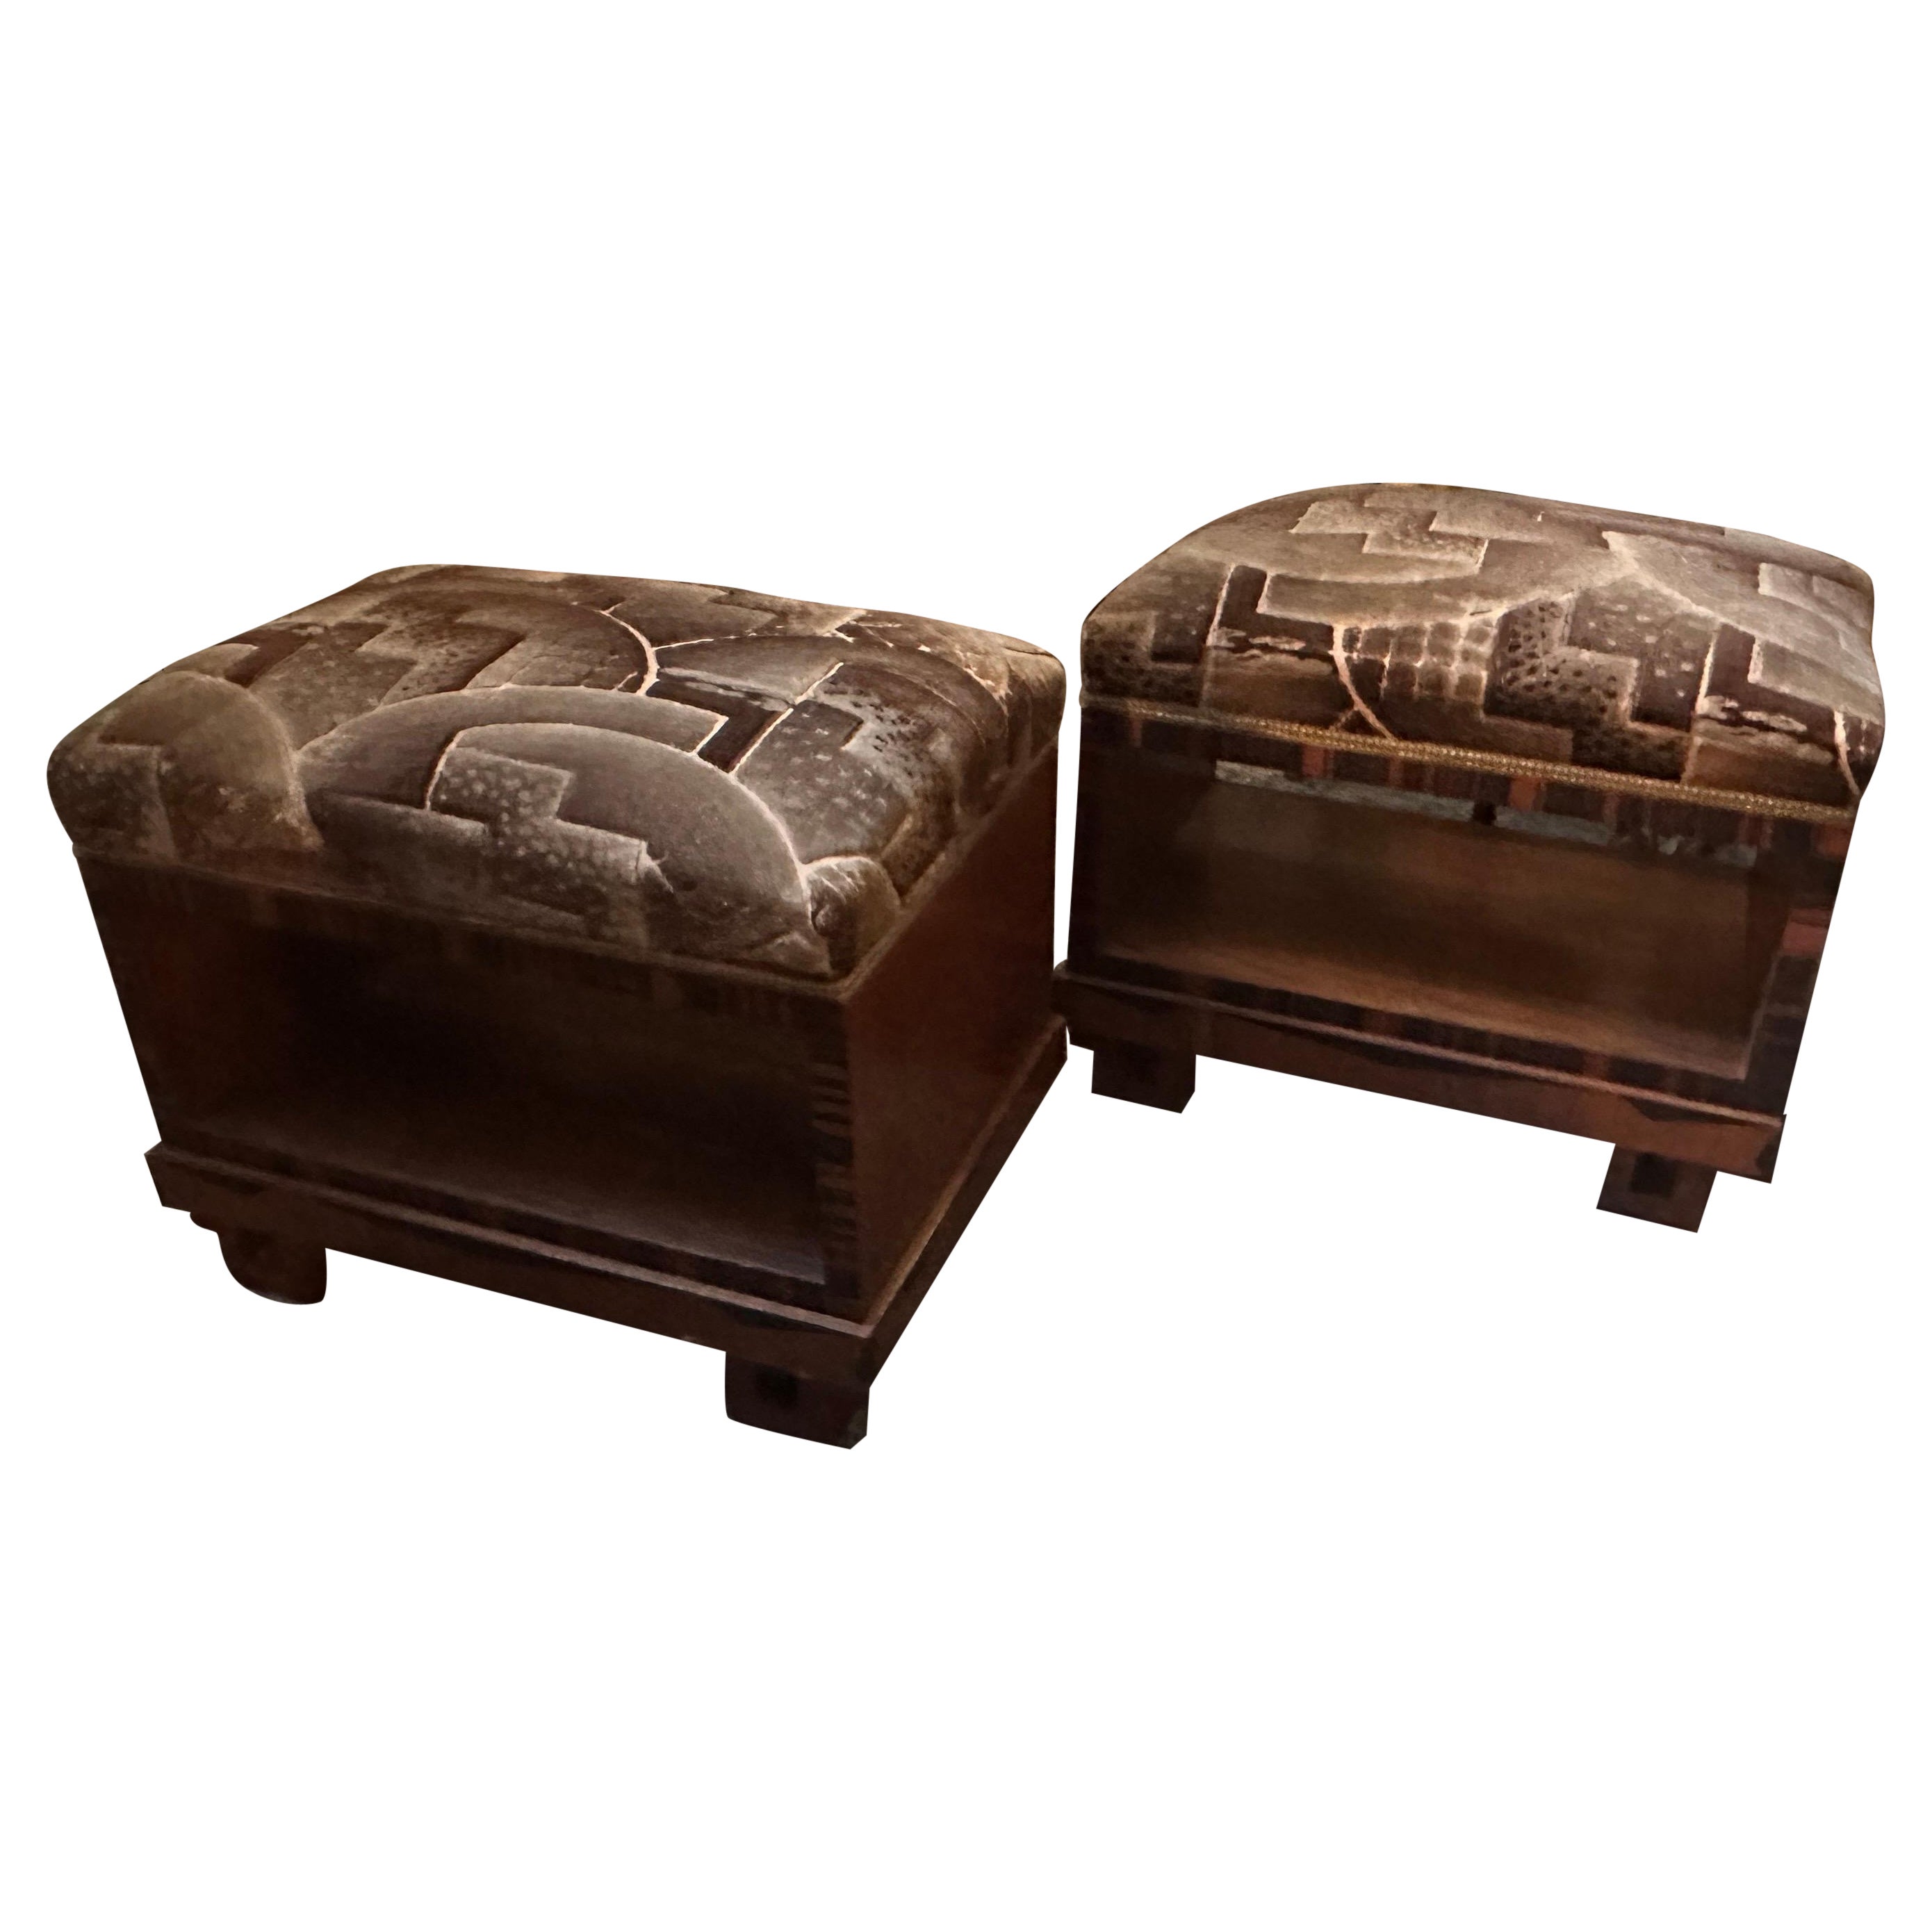 Set of Two 1930s Art Deco Various Wood and Futurist Fabric Italian Poufs